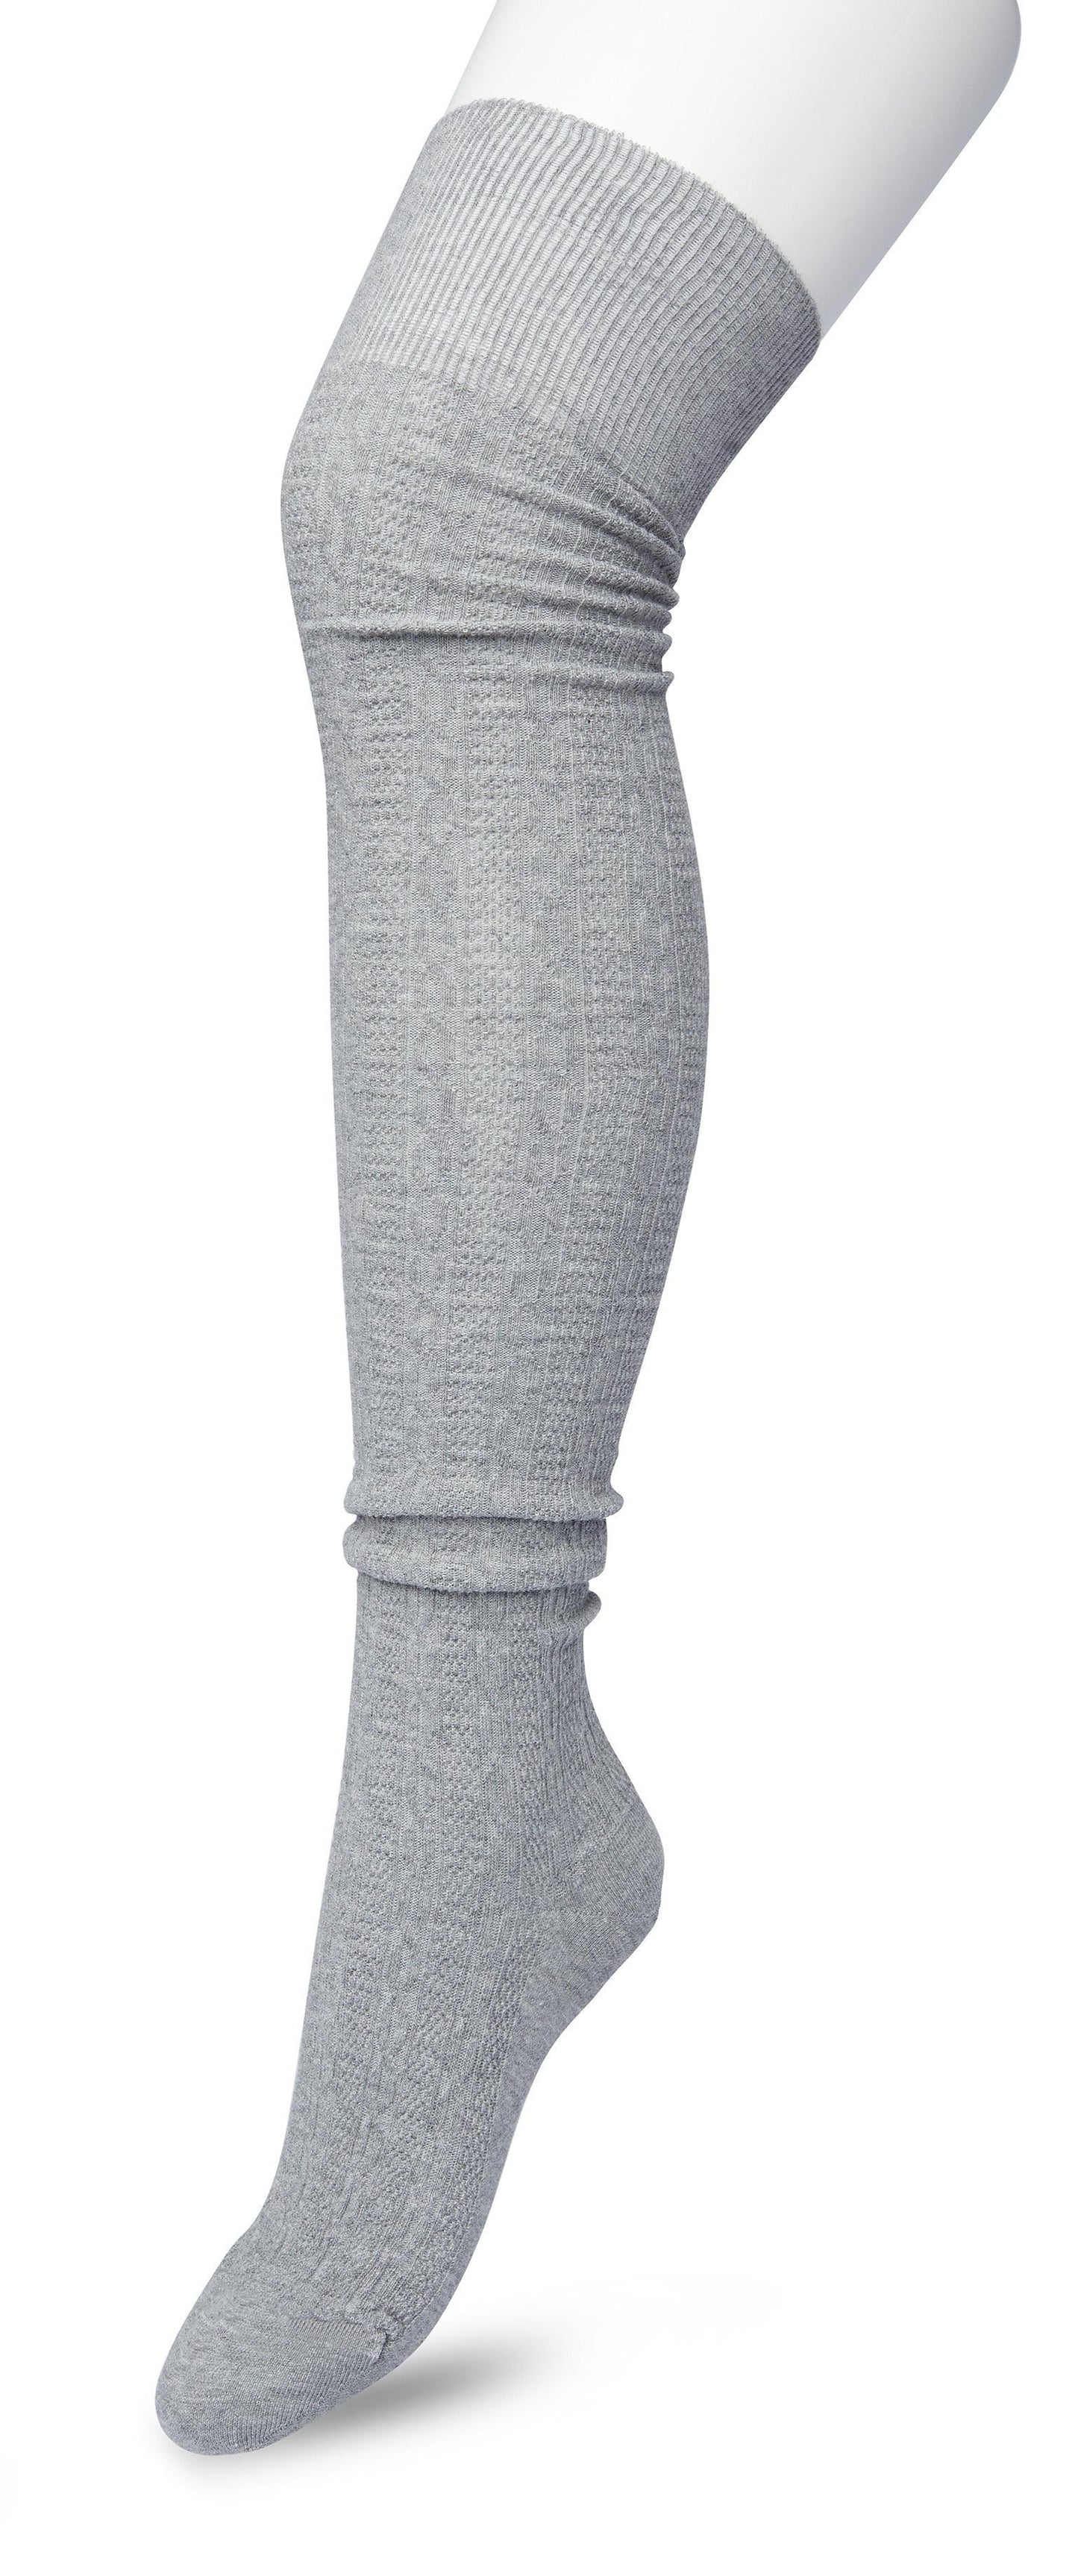 Bonnie Doon Cable Over-Knee Sock - Grey (medium heather grey) cotton knitted over the knee socks with a cable knit style ribbed pattern 